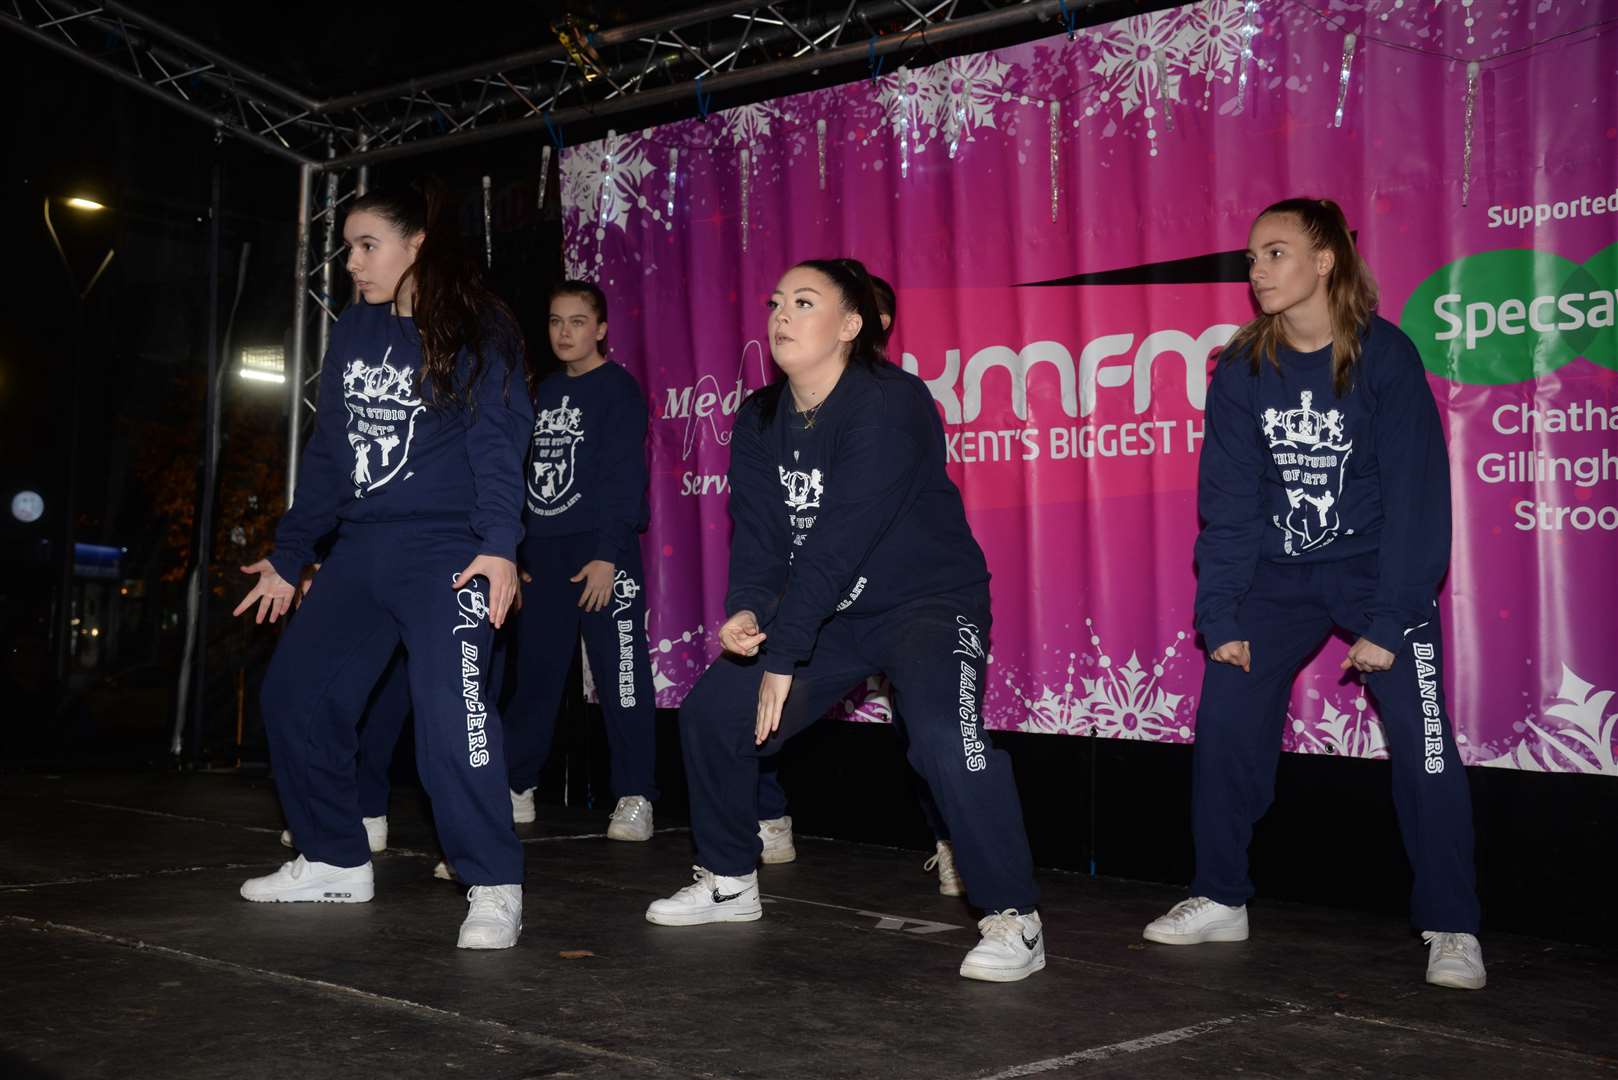 The Studio of Arts performing at the Christmas Lights switch-on in Strood. Picture: Chris Davey